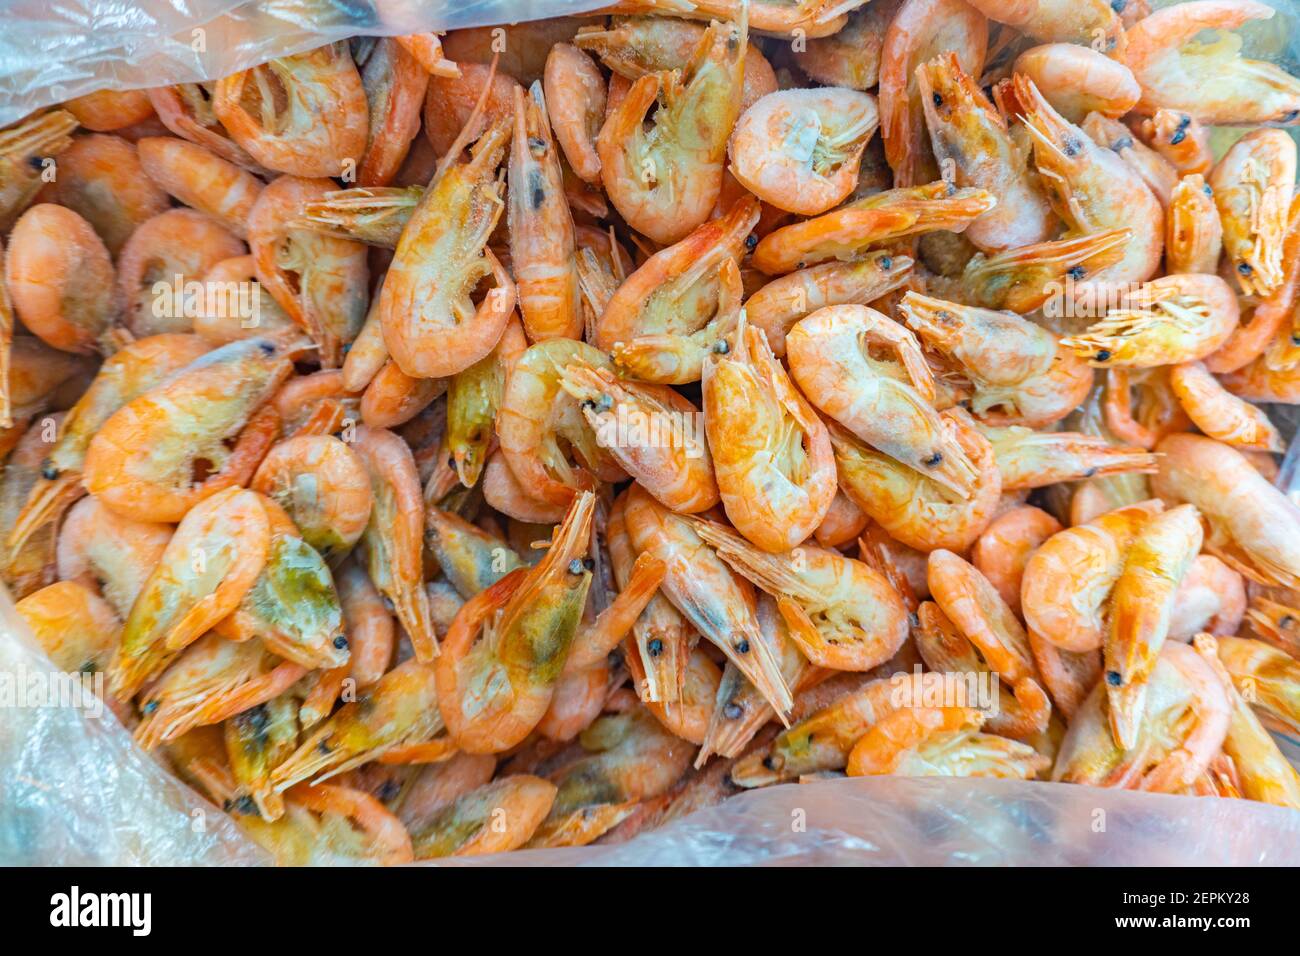 Pink fresh frozen shrimps with ice in a supermarket or fish shop. Fresh frozen prawns, delicacies, sea food concept. Uncooked seafood close up Stock Photo